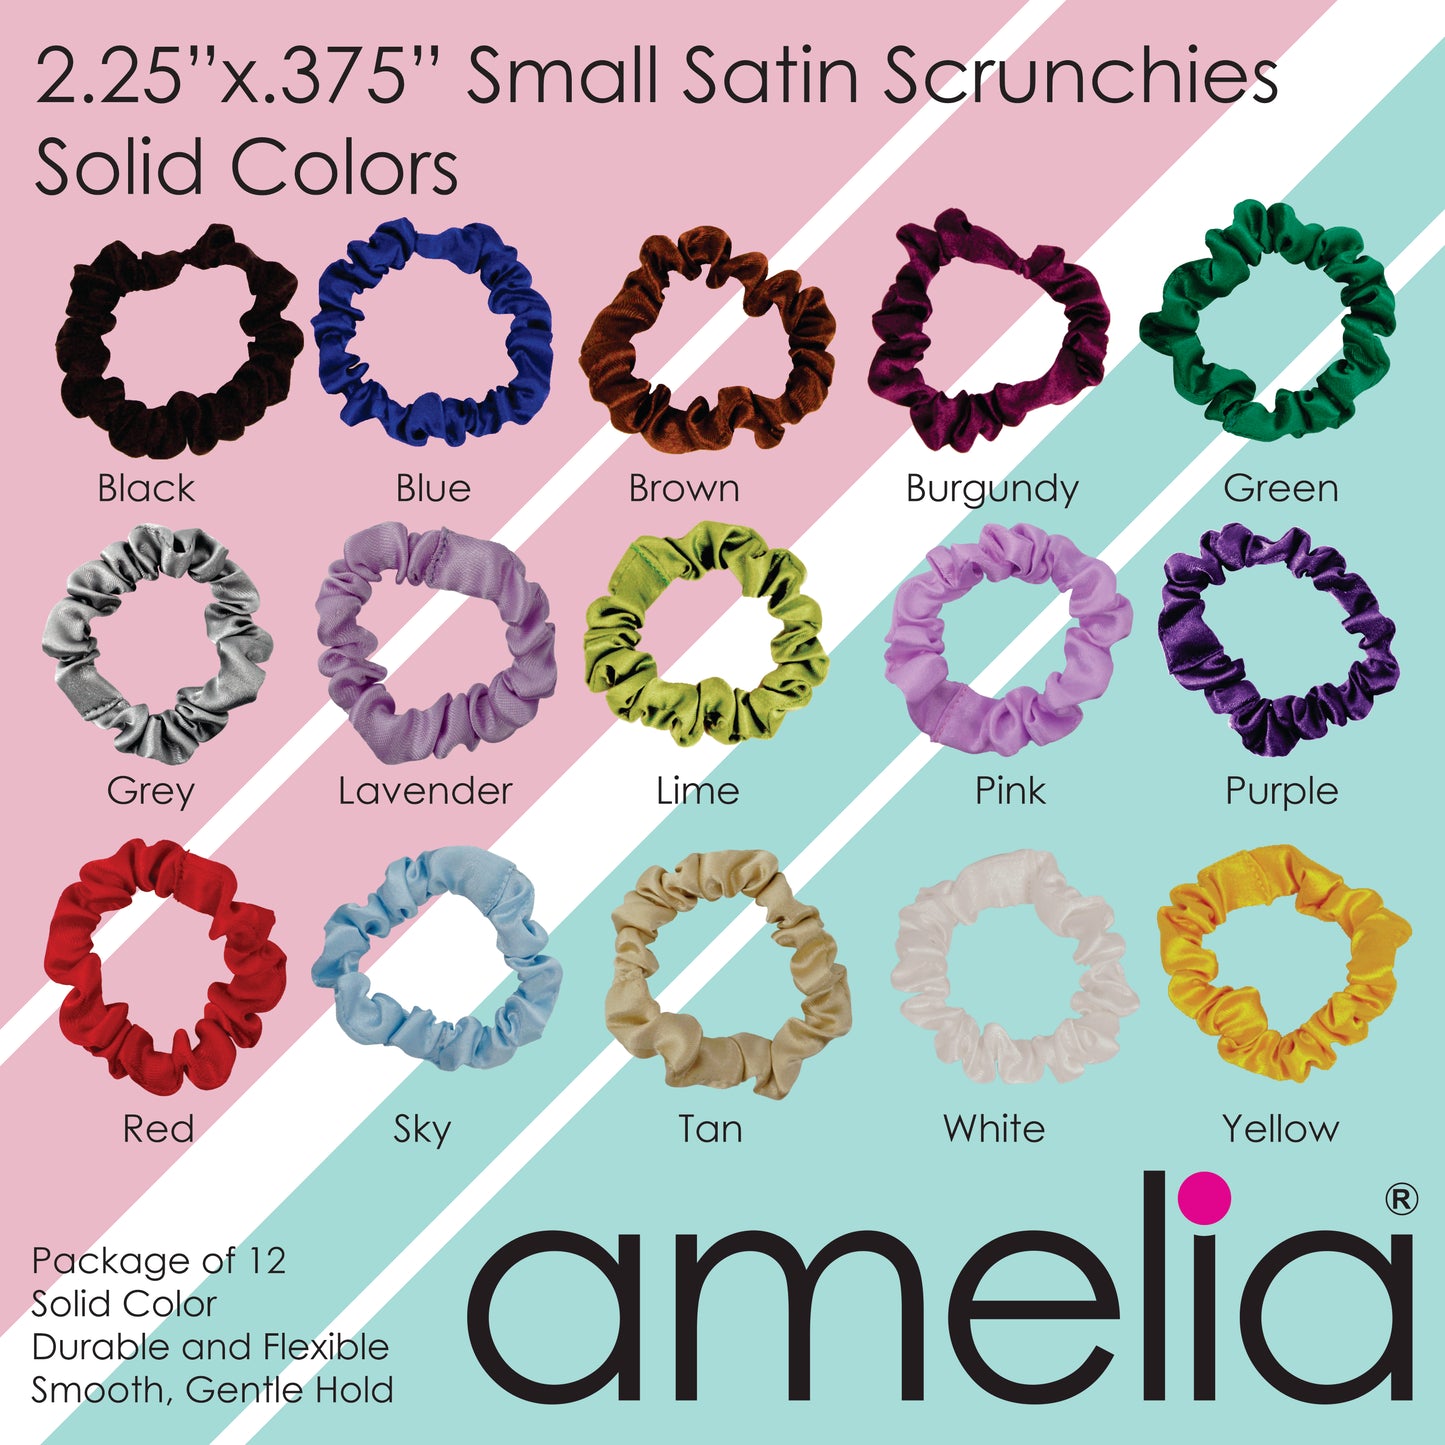 Amelia Beauty, Gray Satin Scrunchies, 2.25in Diameter, Gentle on Hair, Strong Hold, No Snag, No Dents or Creases. 12 Pack